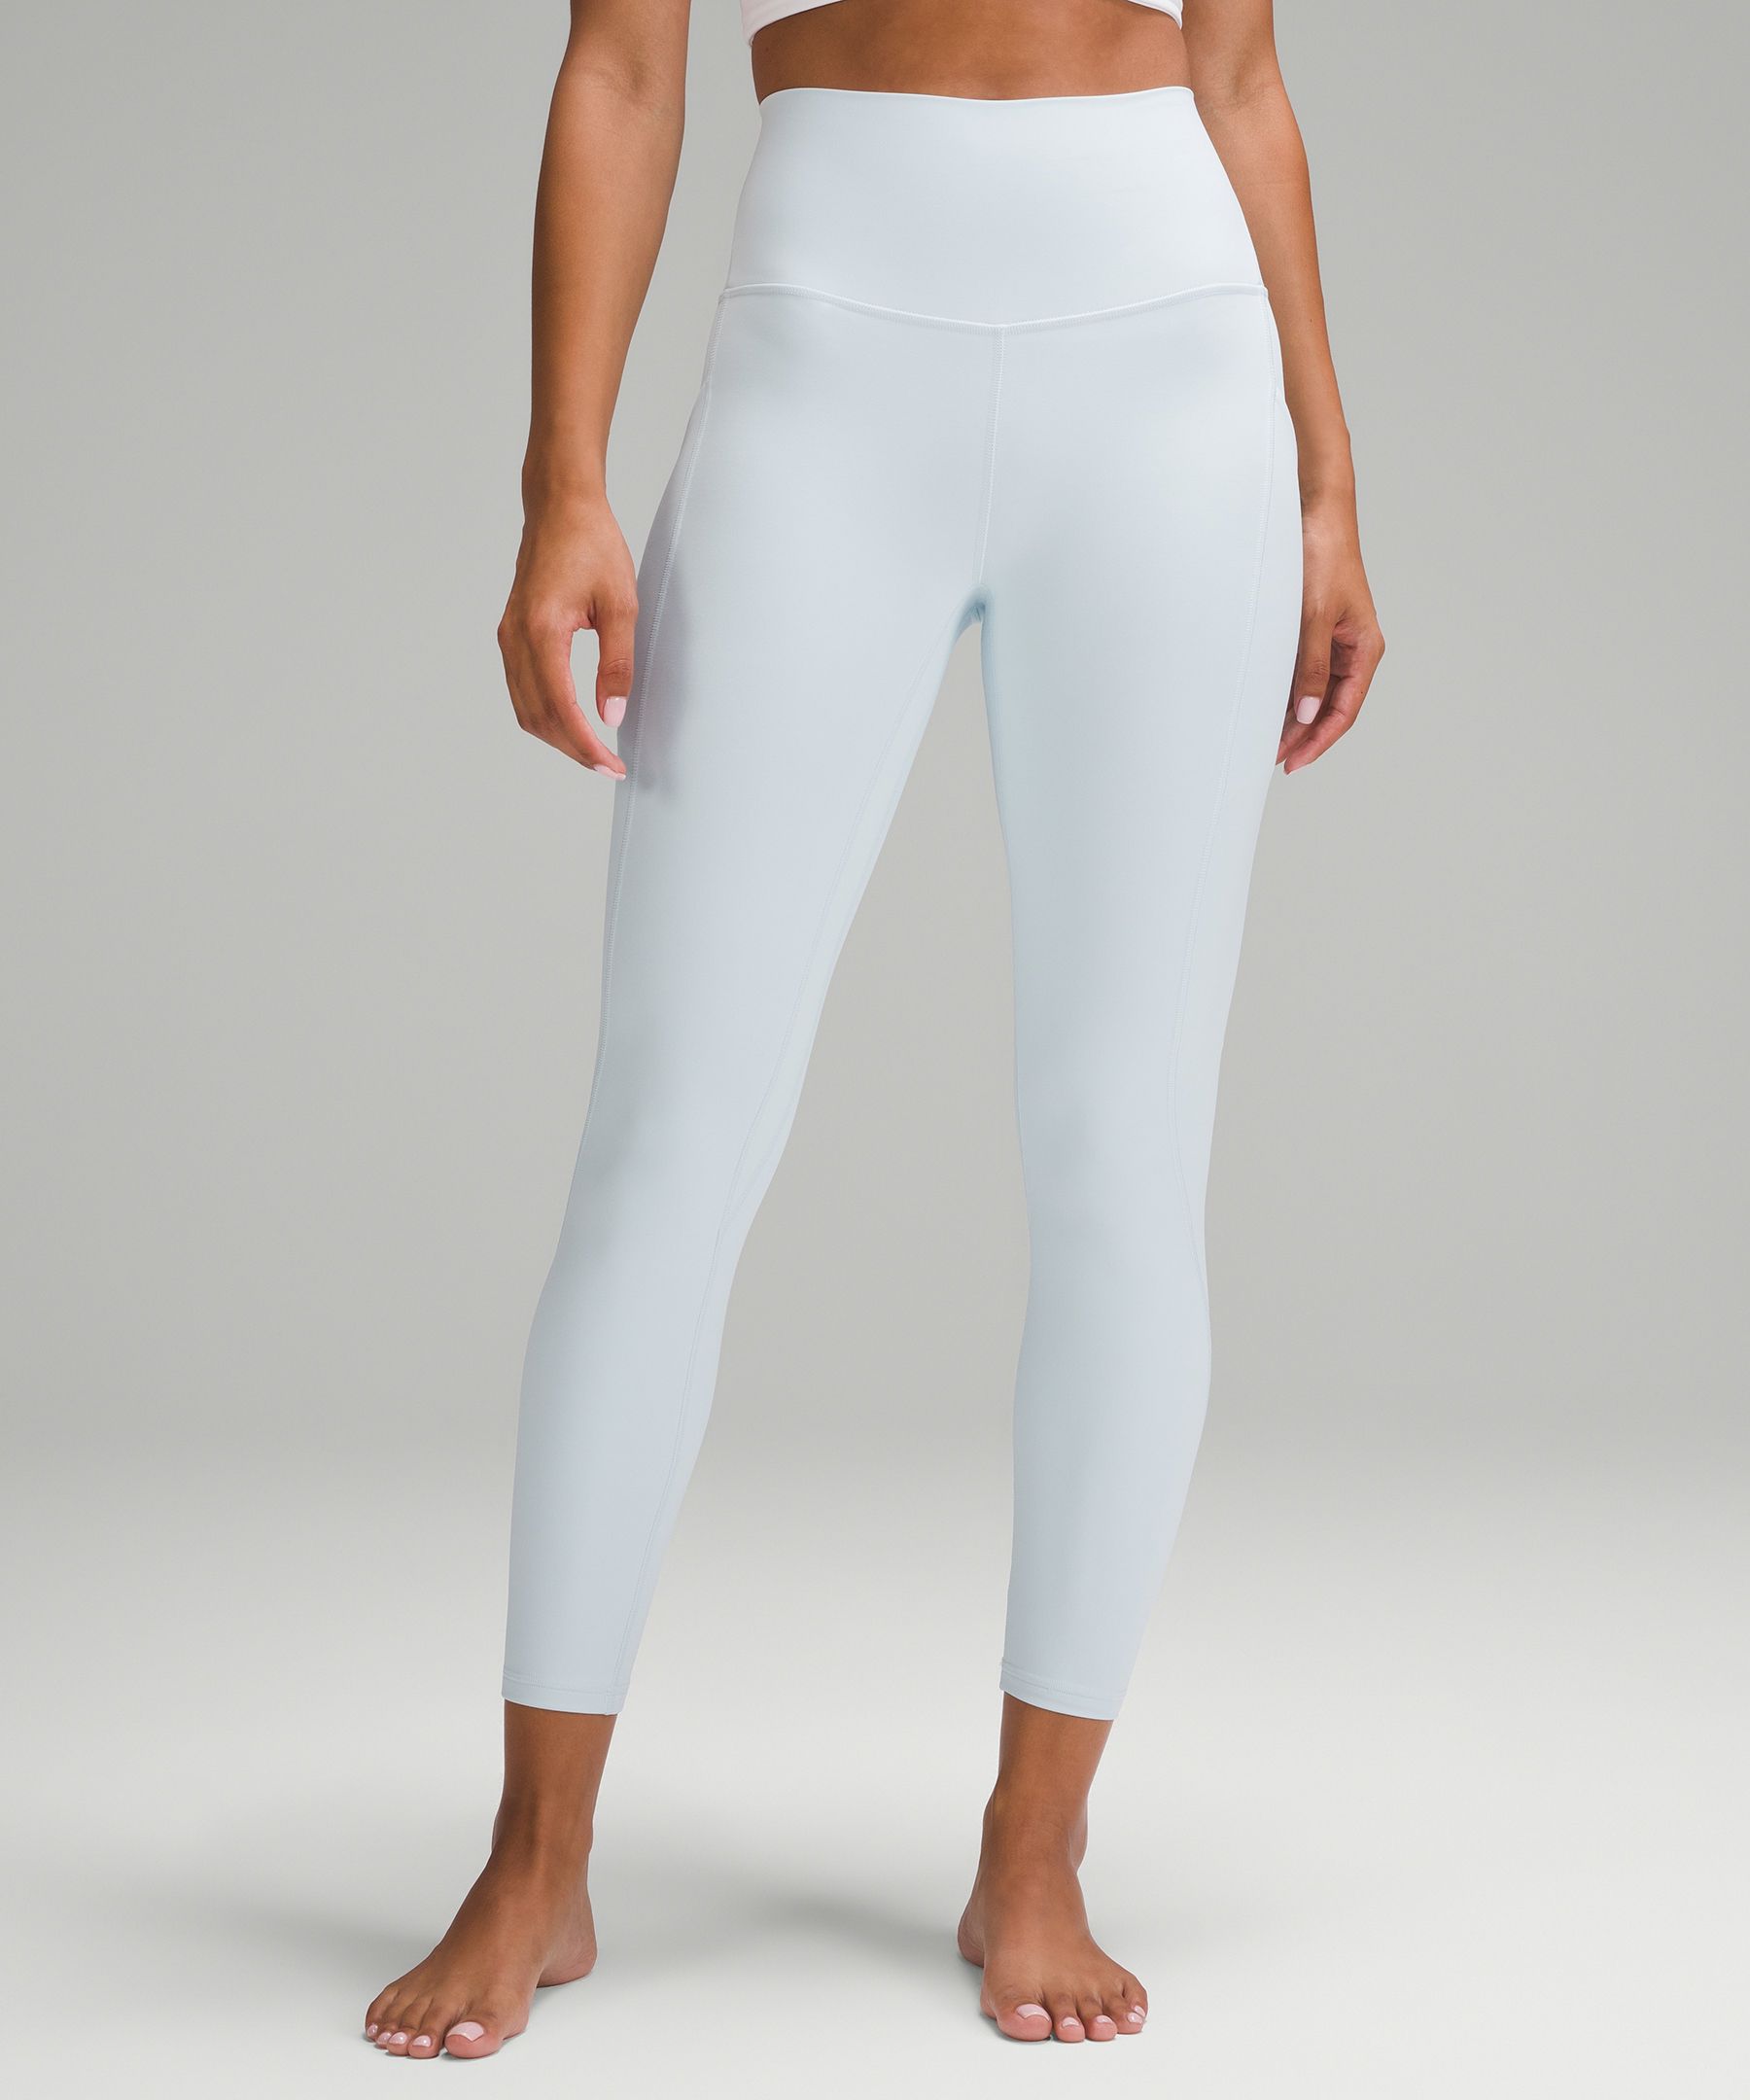 Lululemon High-Waisted Yoga Pants with Sculpted Fit and Breathable Fabric